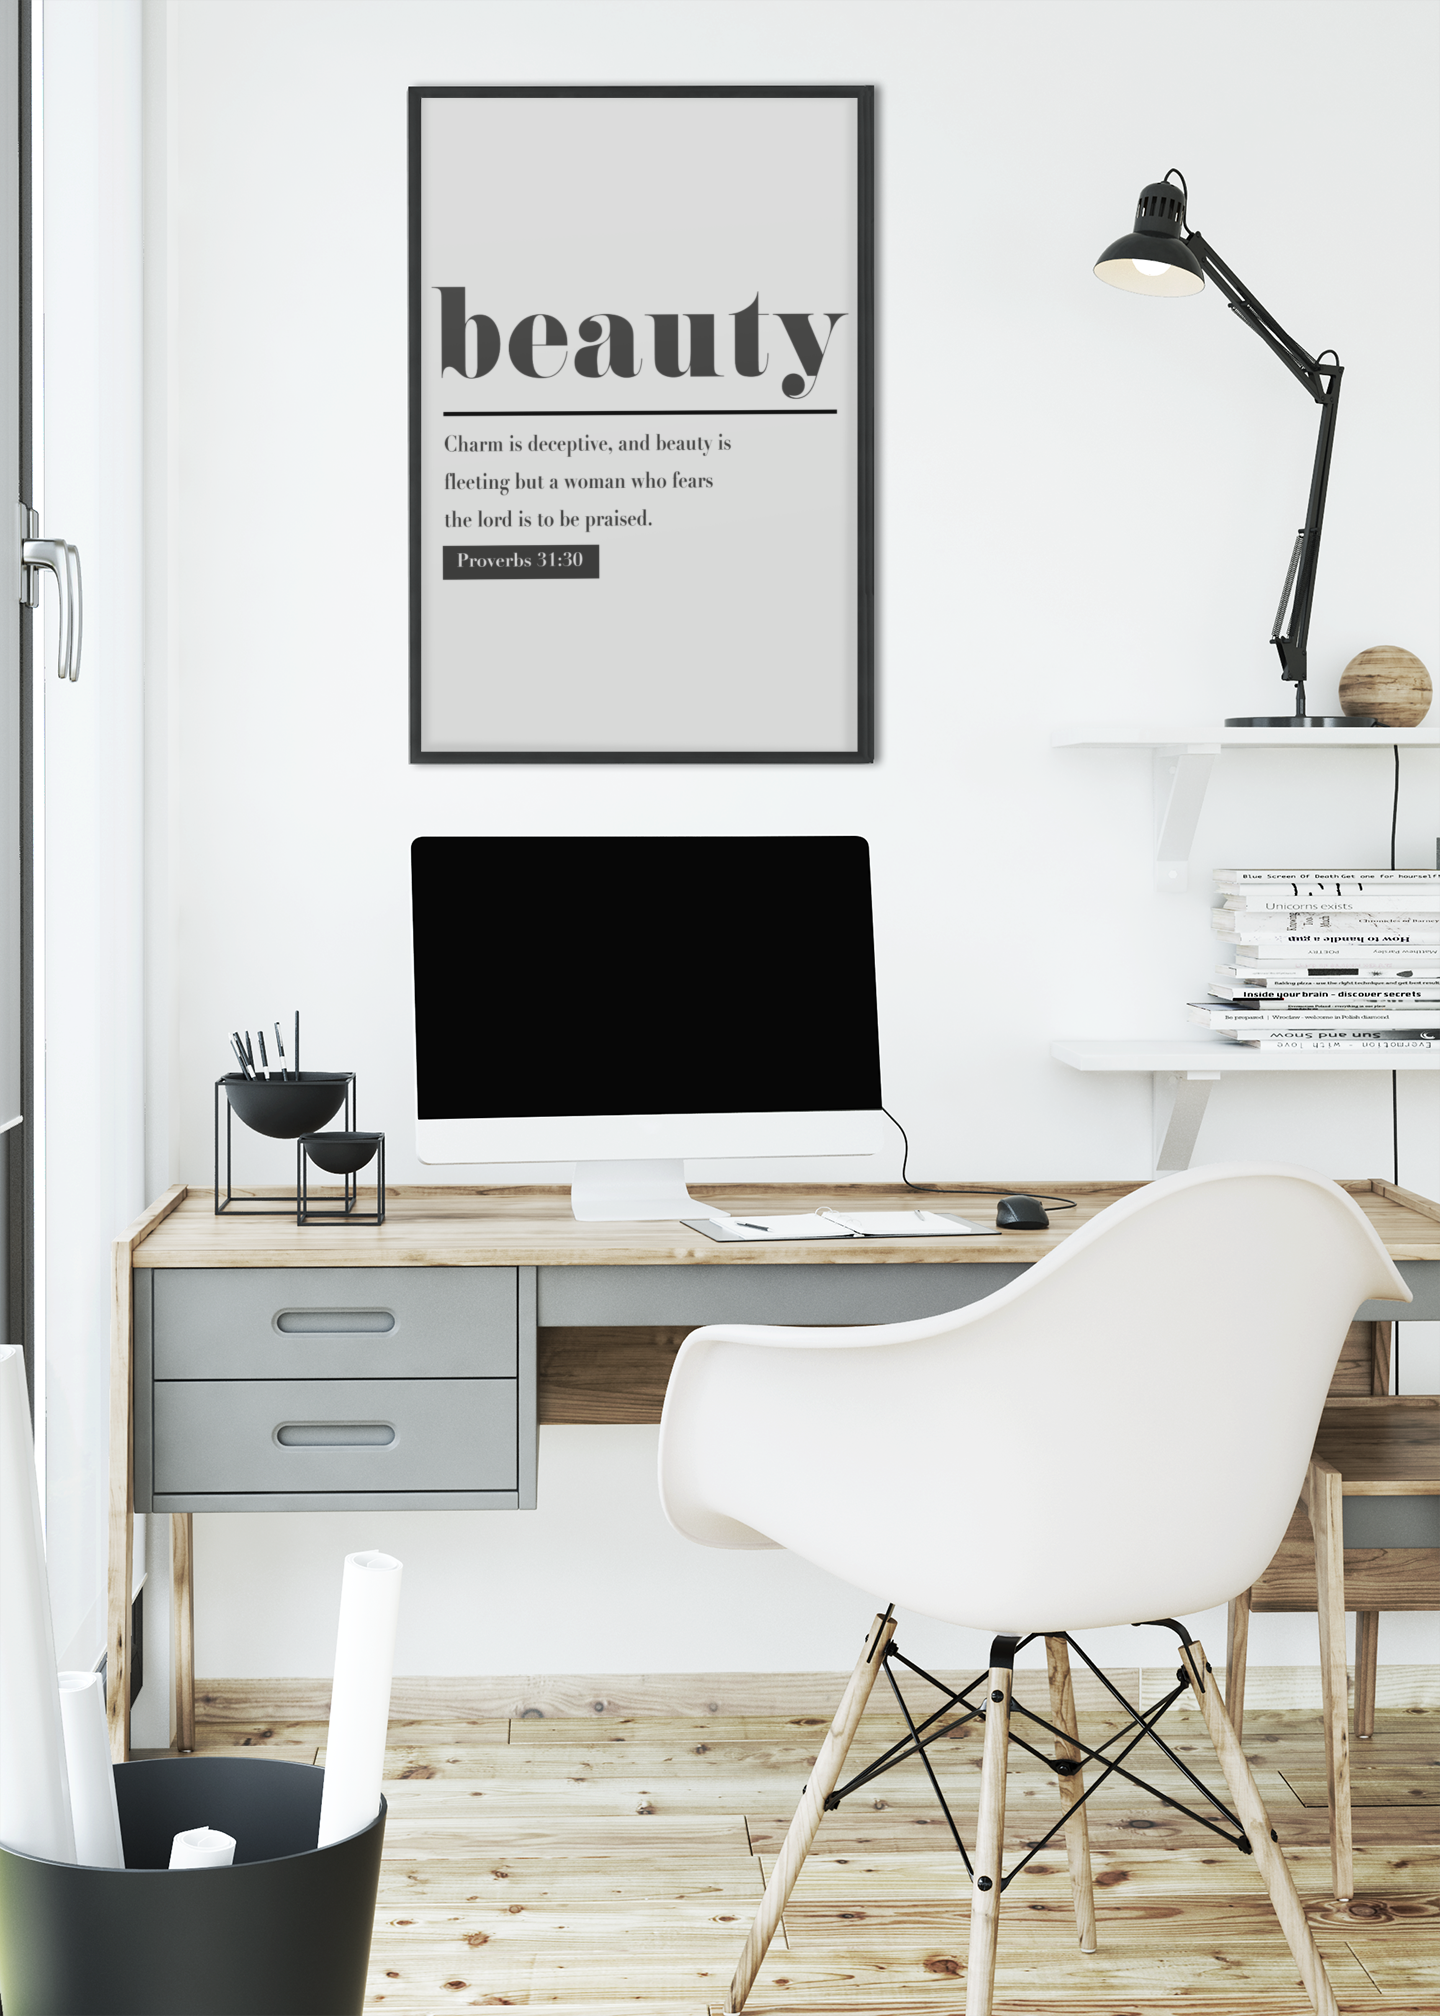 Christian art poster based on proverbs 31:30. A modern room with desk and chair. 